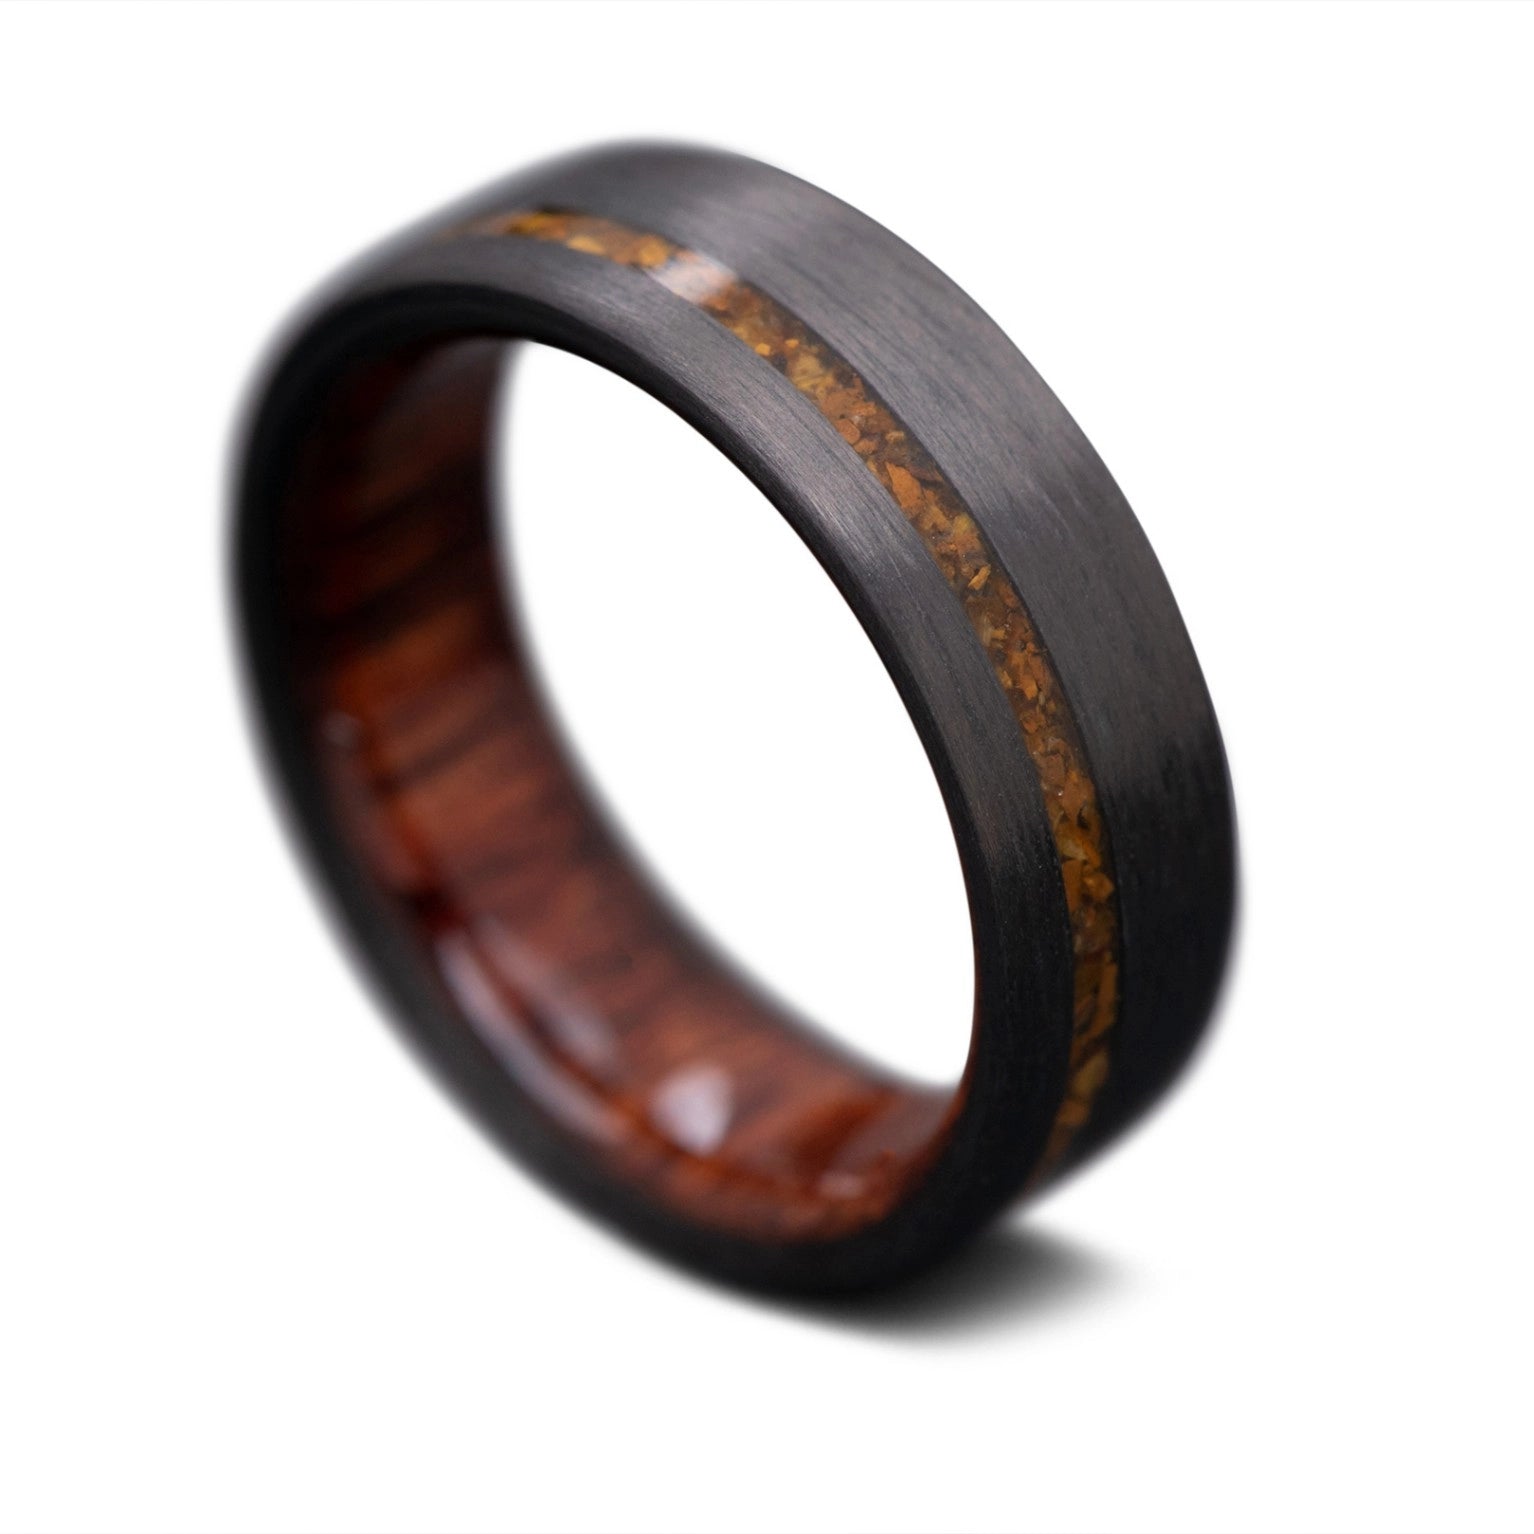 CarbonUni Core ring with Tiger Eye inlay and  Leopardwood inner sleeve, 7mm -THE VERTEX